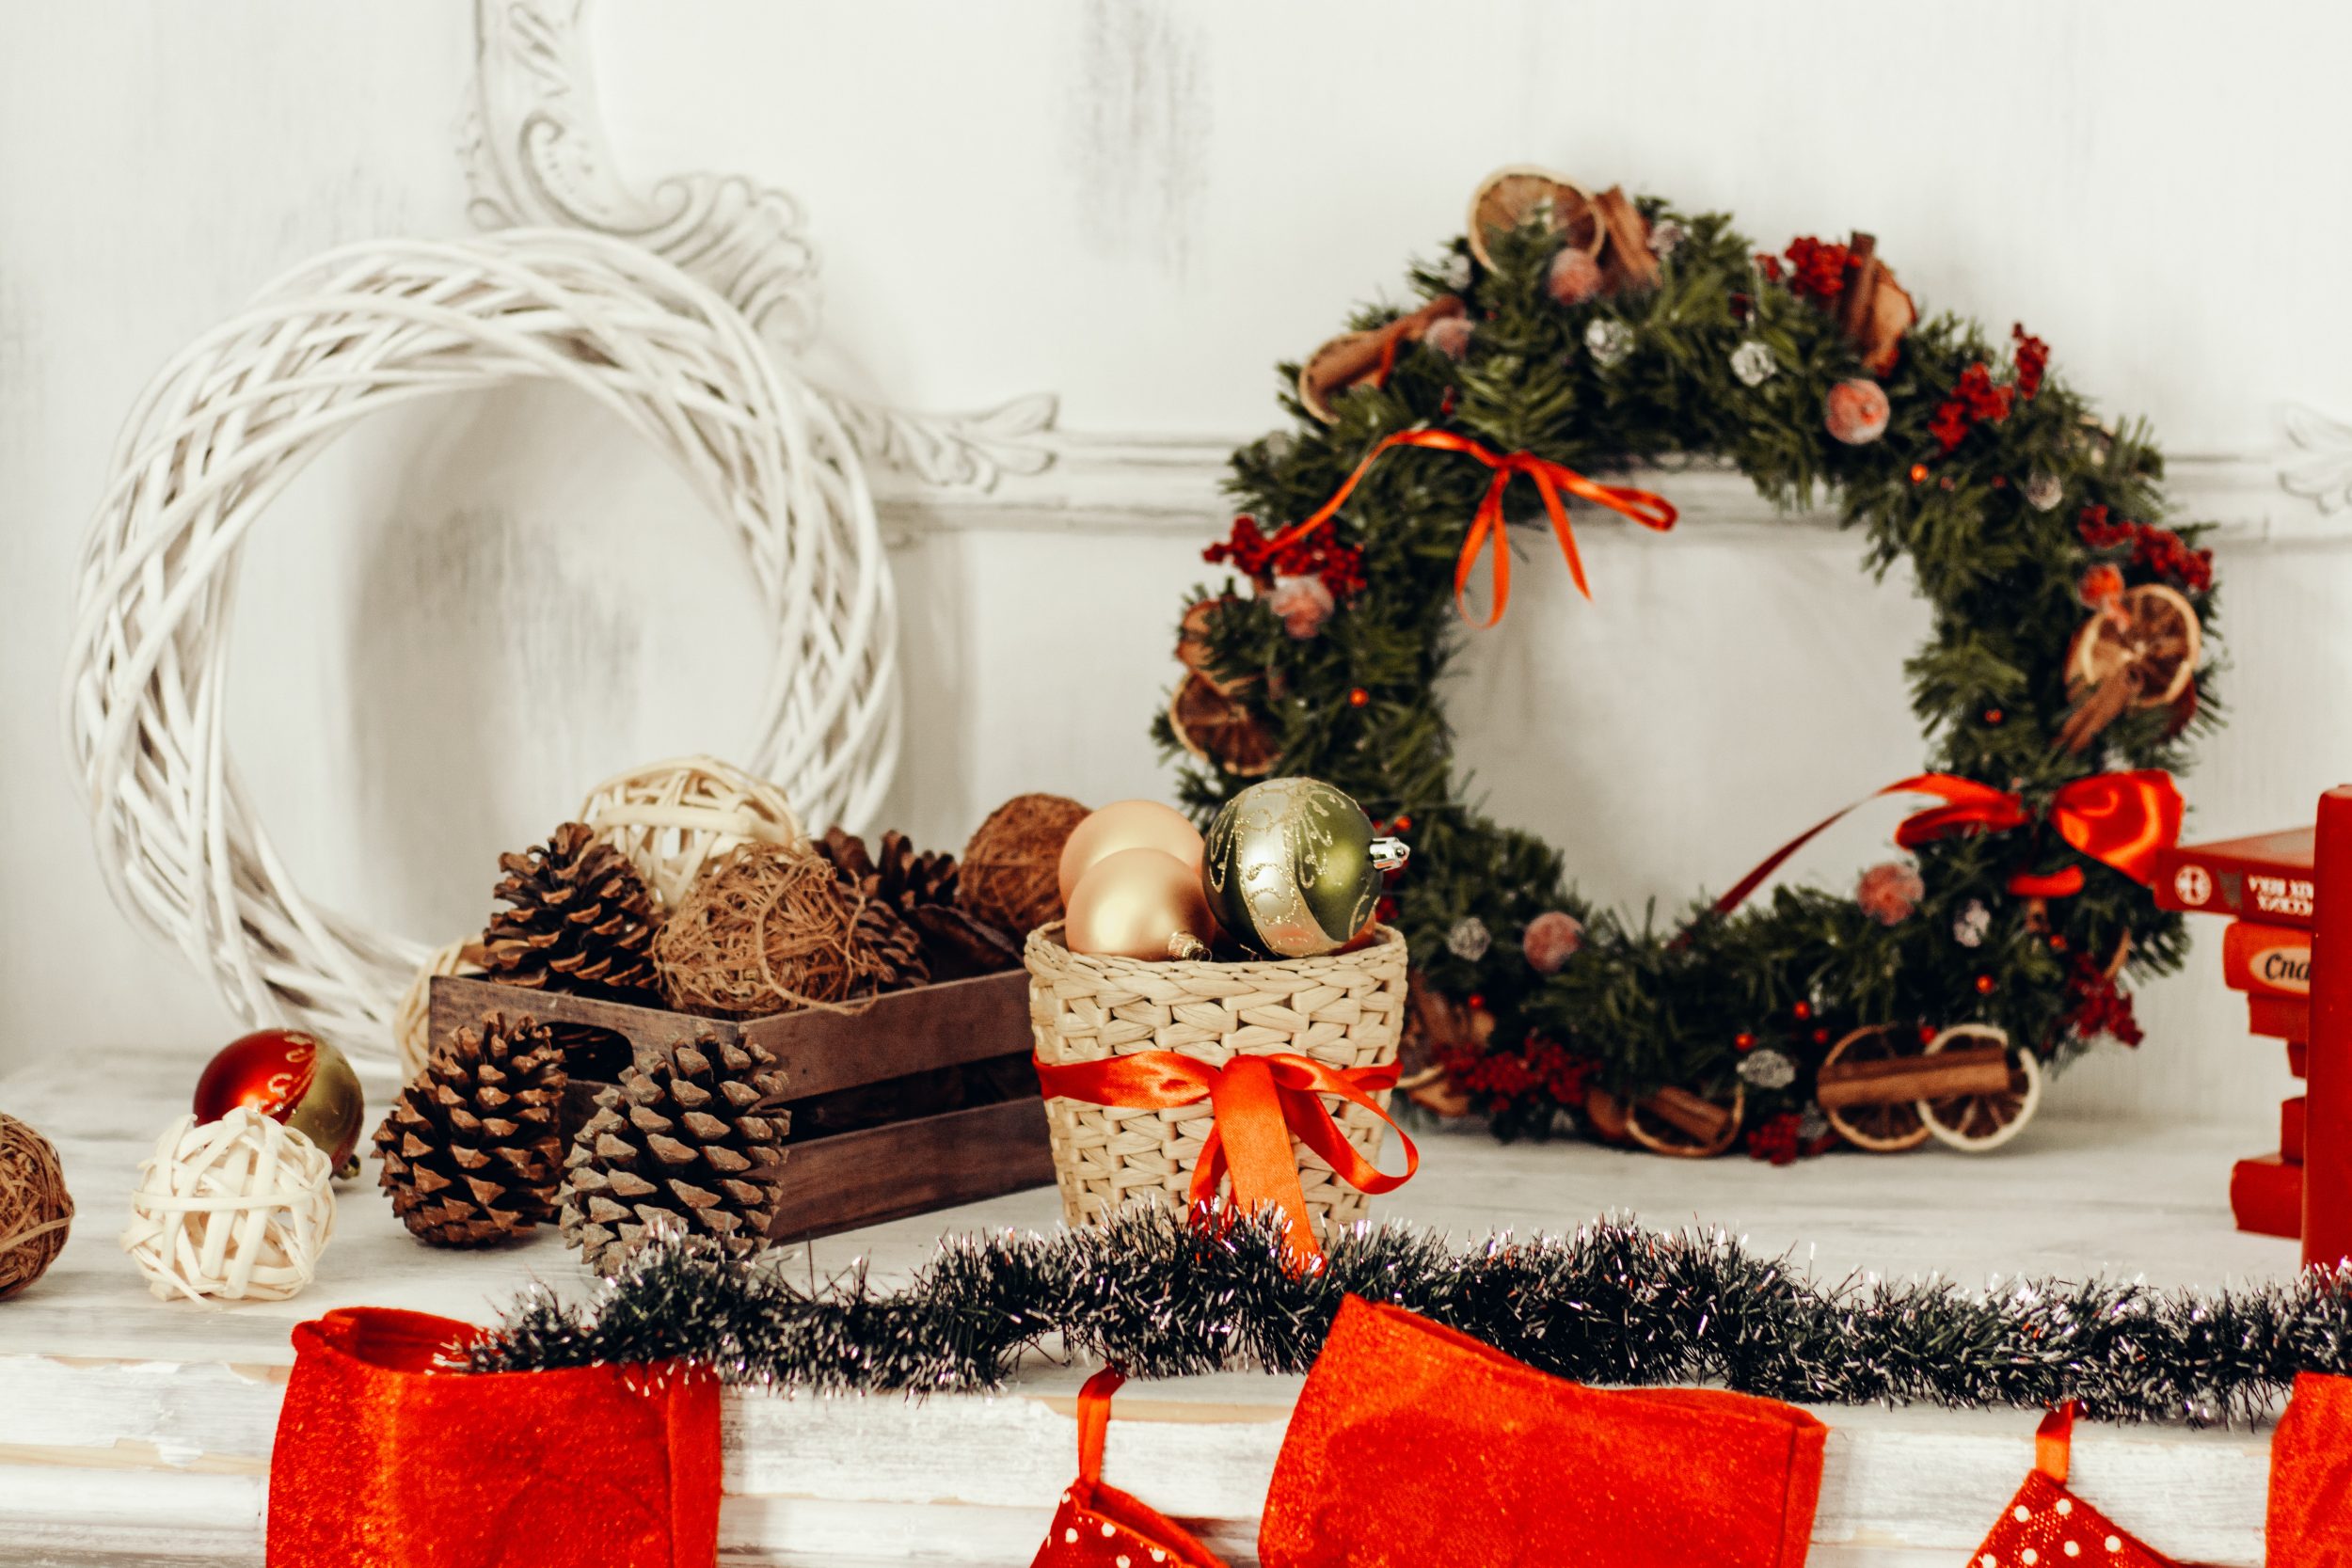 Making Your Site Holiday-Season Ready